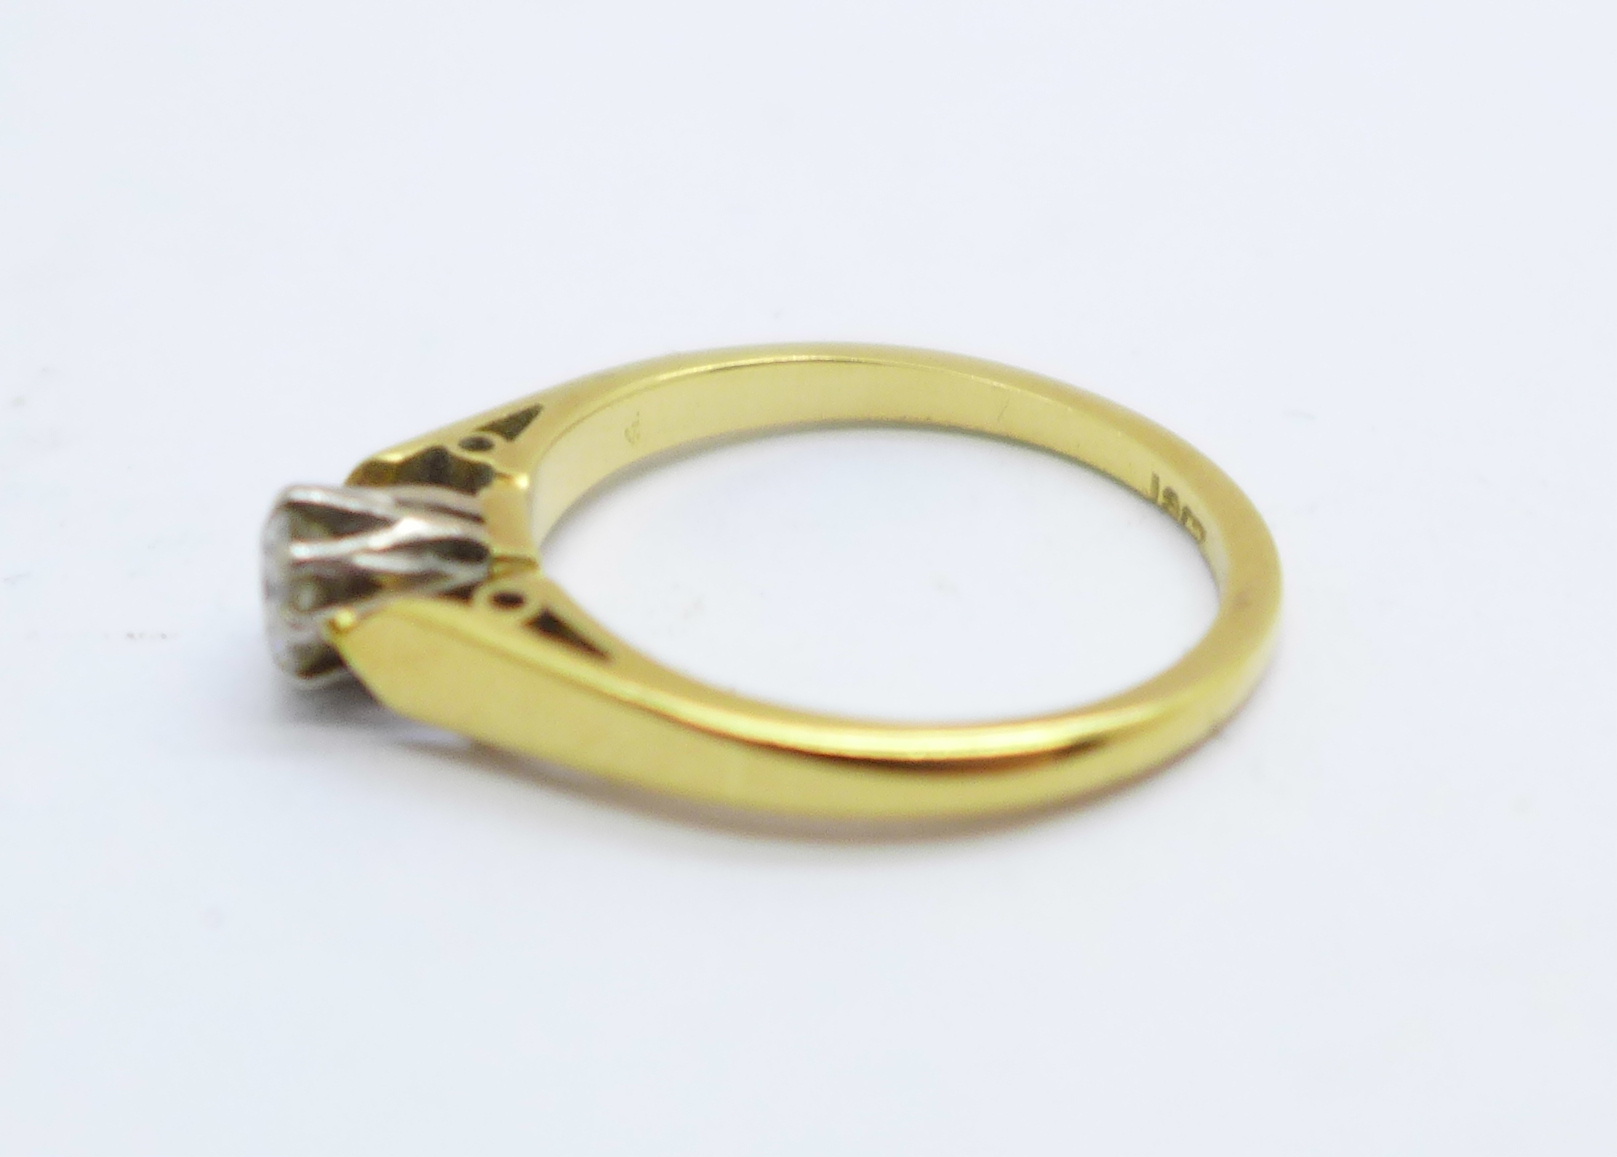 An 18ct gold and diamond solitaire ring, 2.7g, K, approximately 0.25carat weight - Image 2 of 3